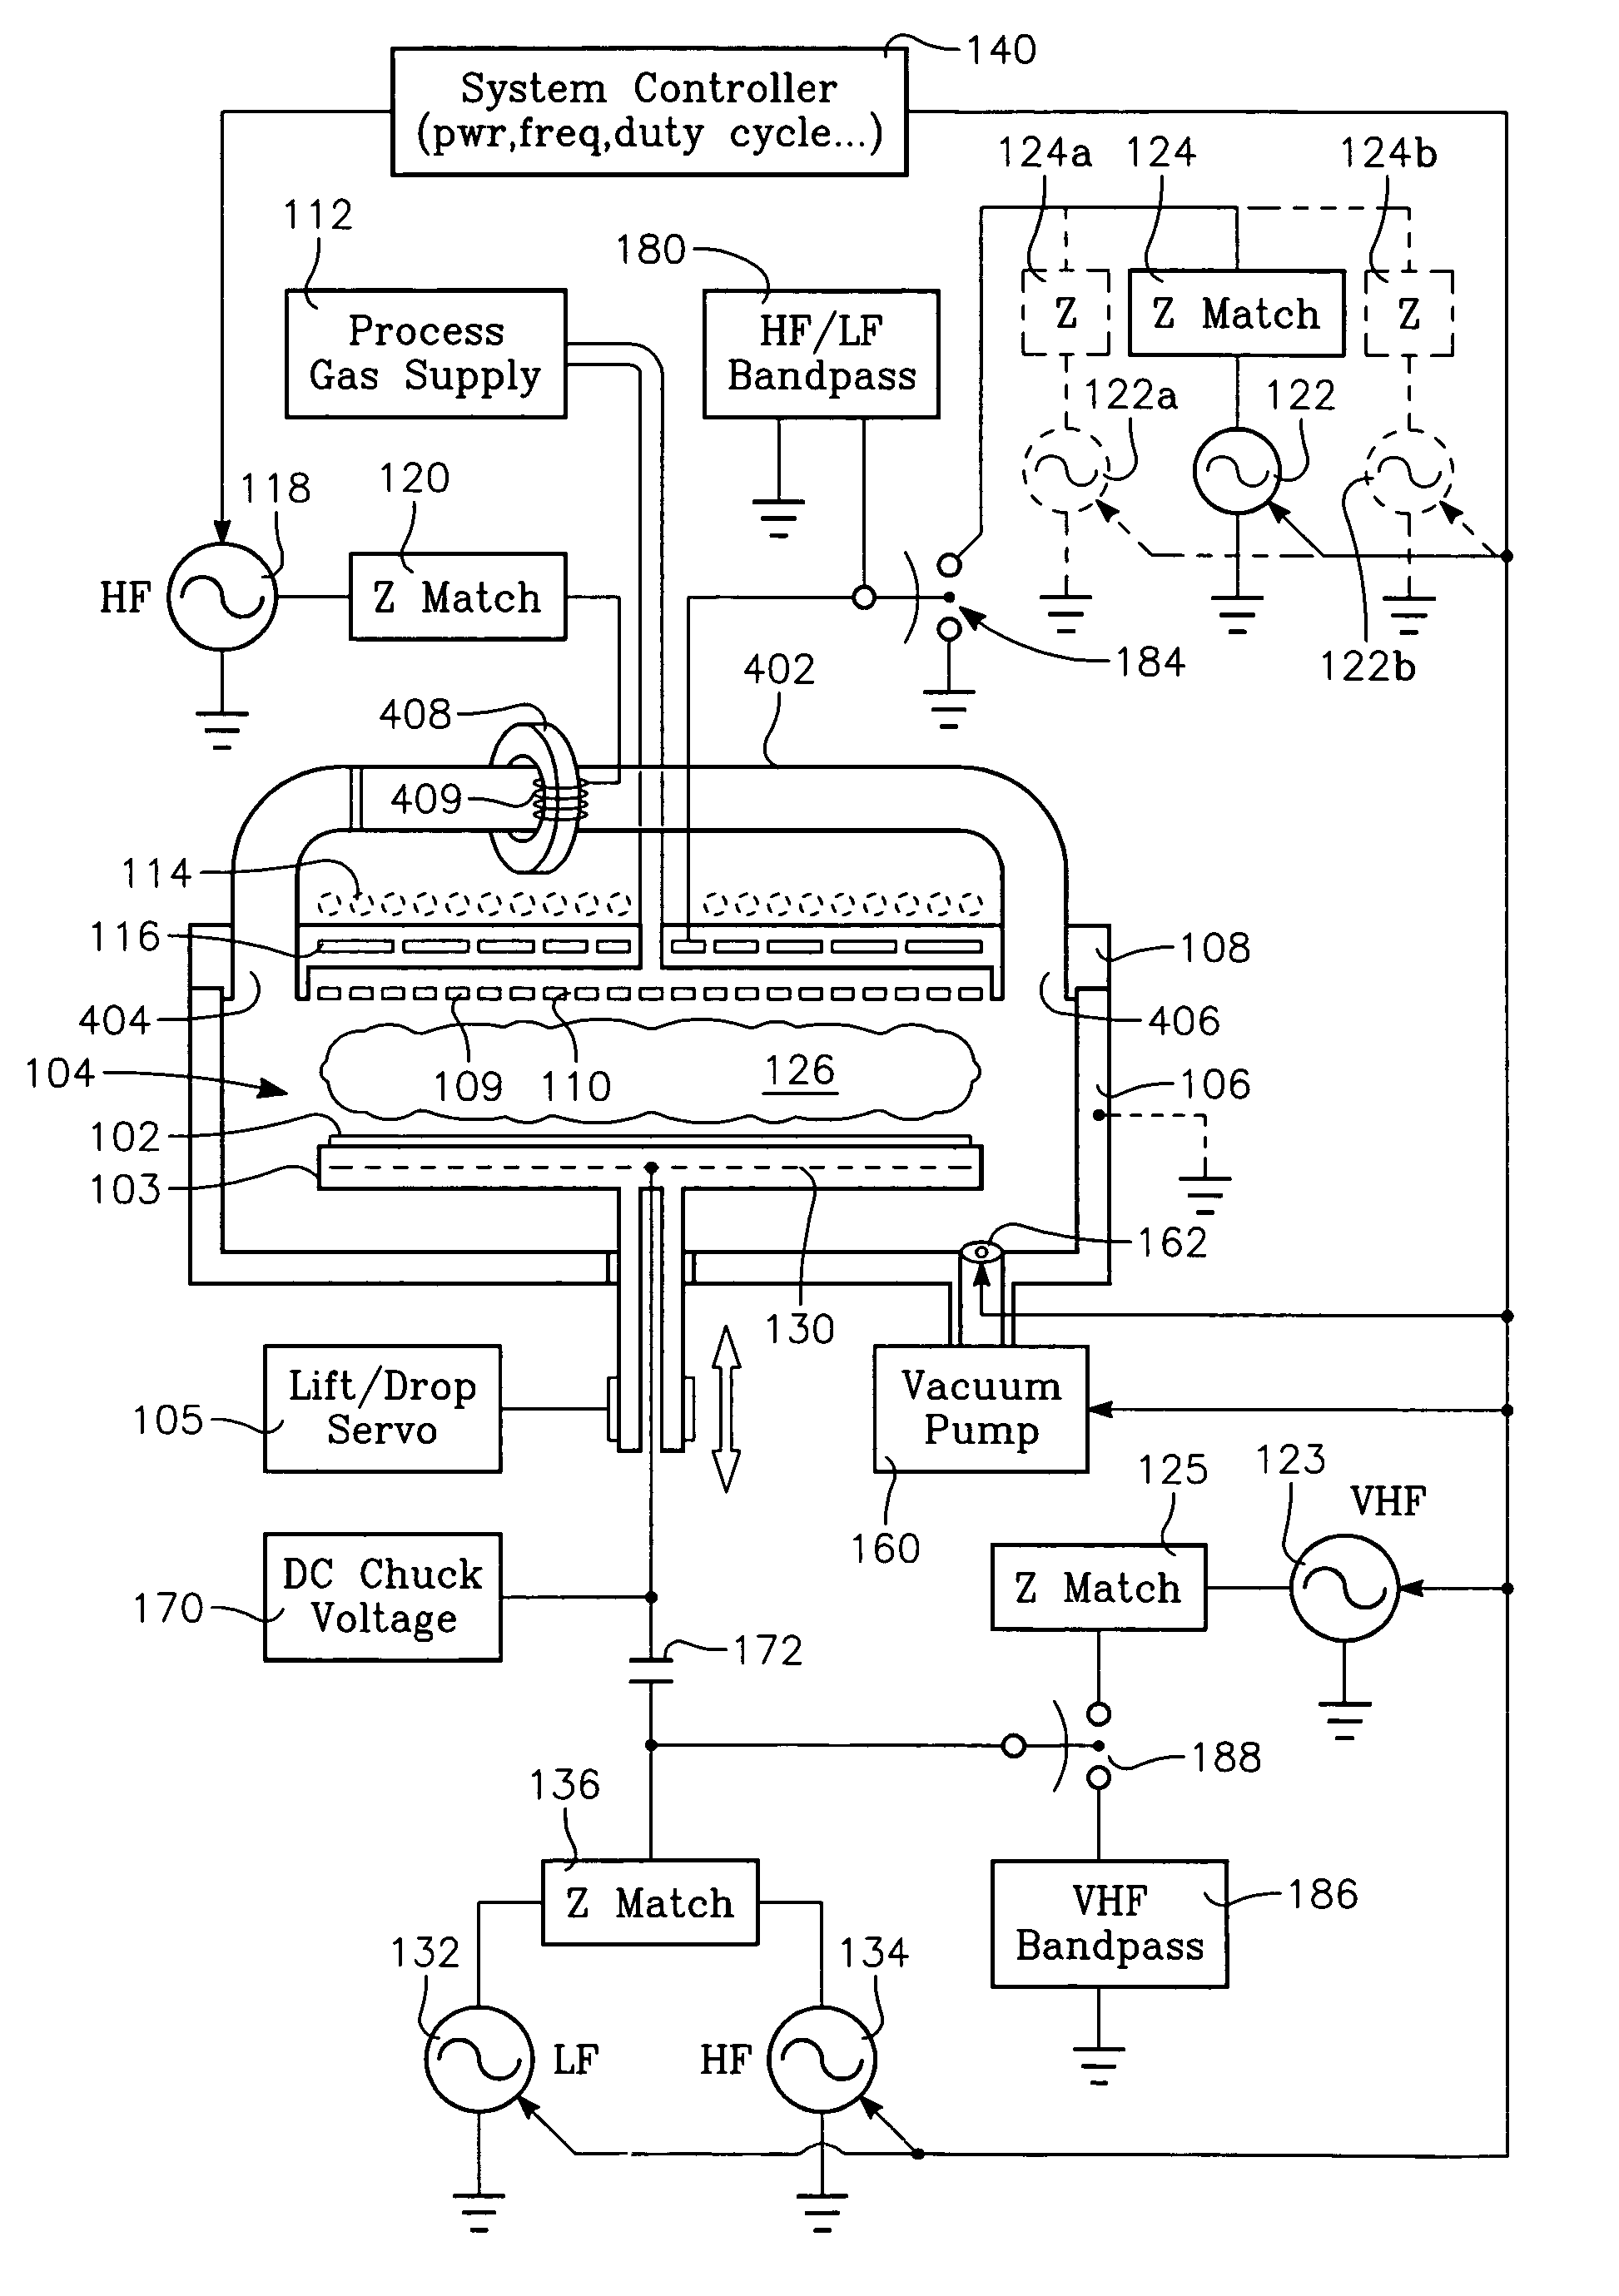 Plasma reactor apparatus with independent capacitive and toroidal plasma sources